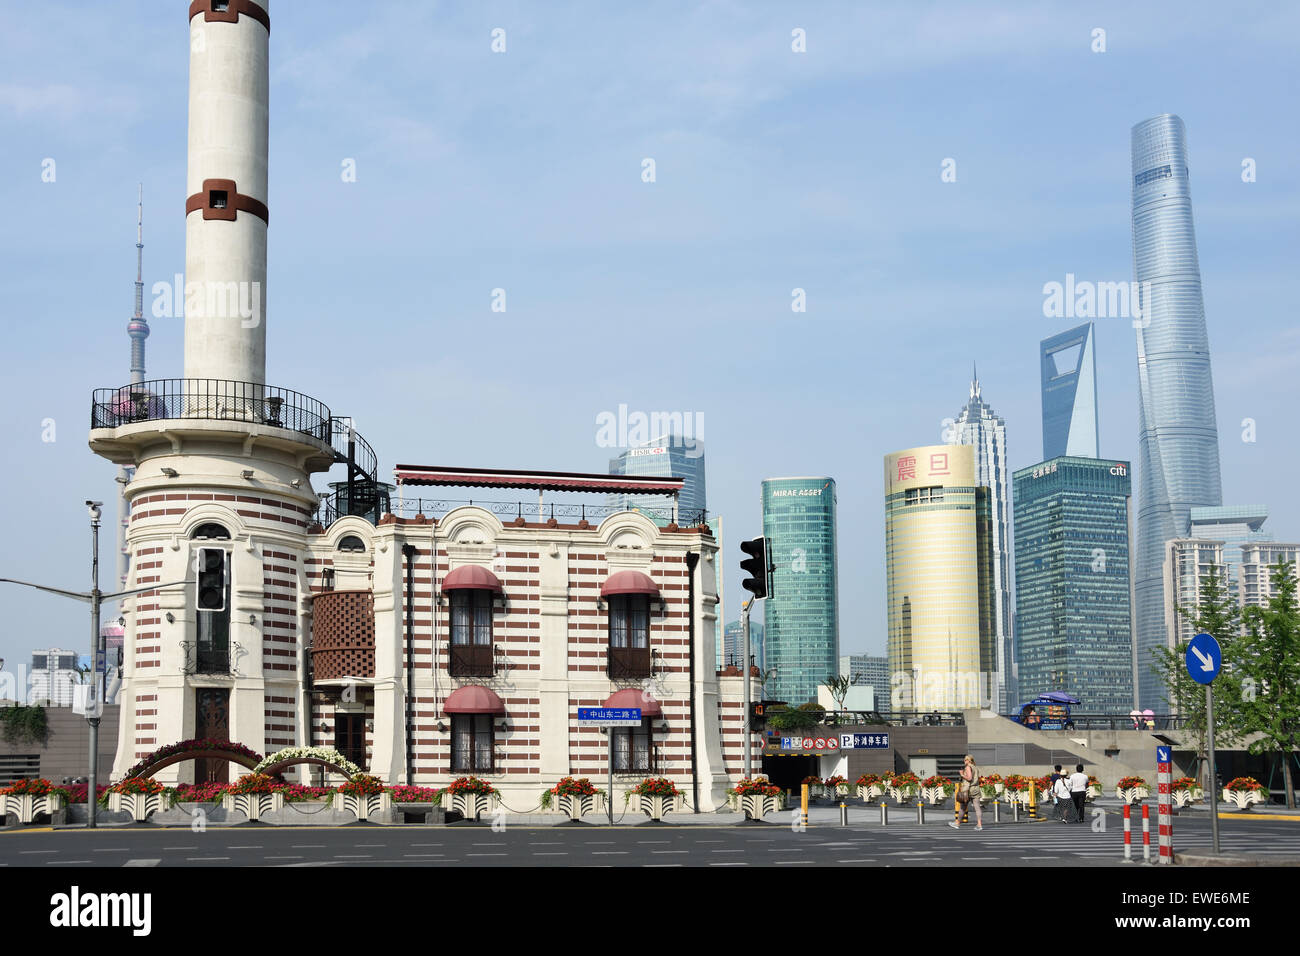 Lighthouse Museum on the Bund Shanghai background Pudong City SkylineOriental Pearl television tower, Jin Mao Tower, Huangpu River China Stock Photo